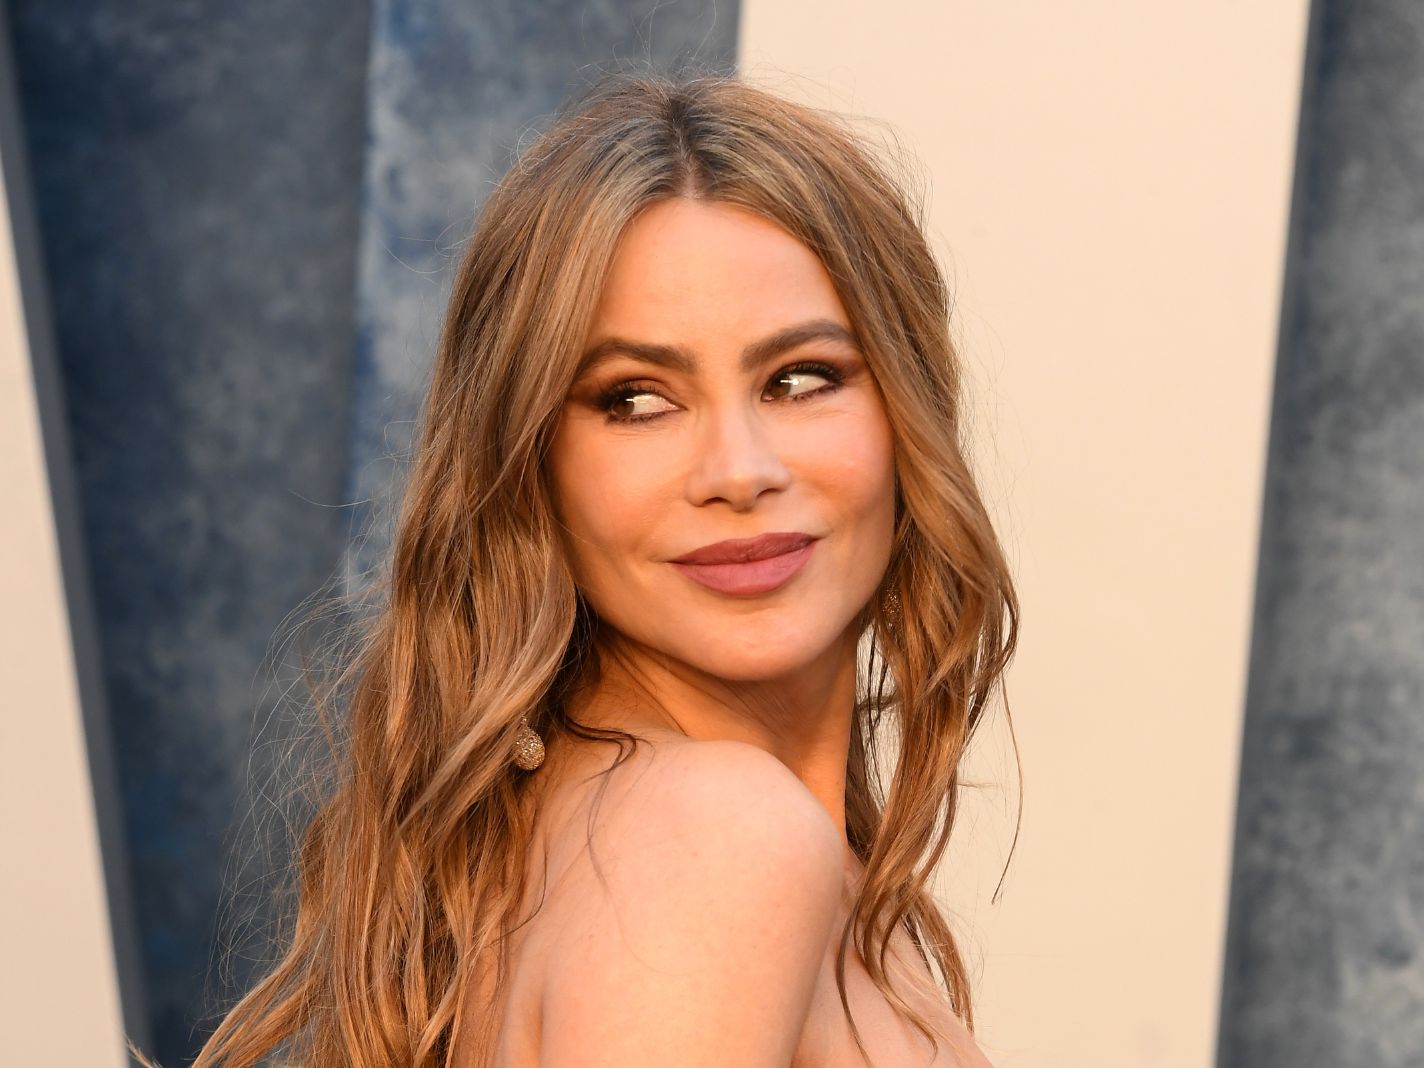 Sofia Vergara Drops Beauty Line with Sun Care Focus — See Products Here